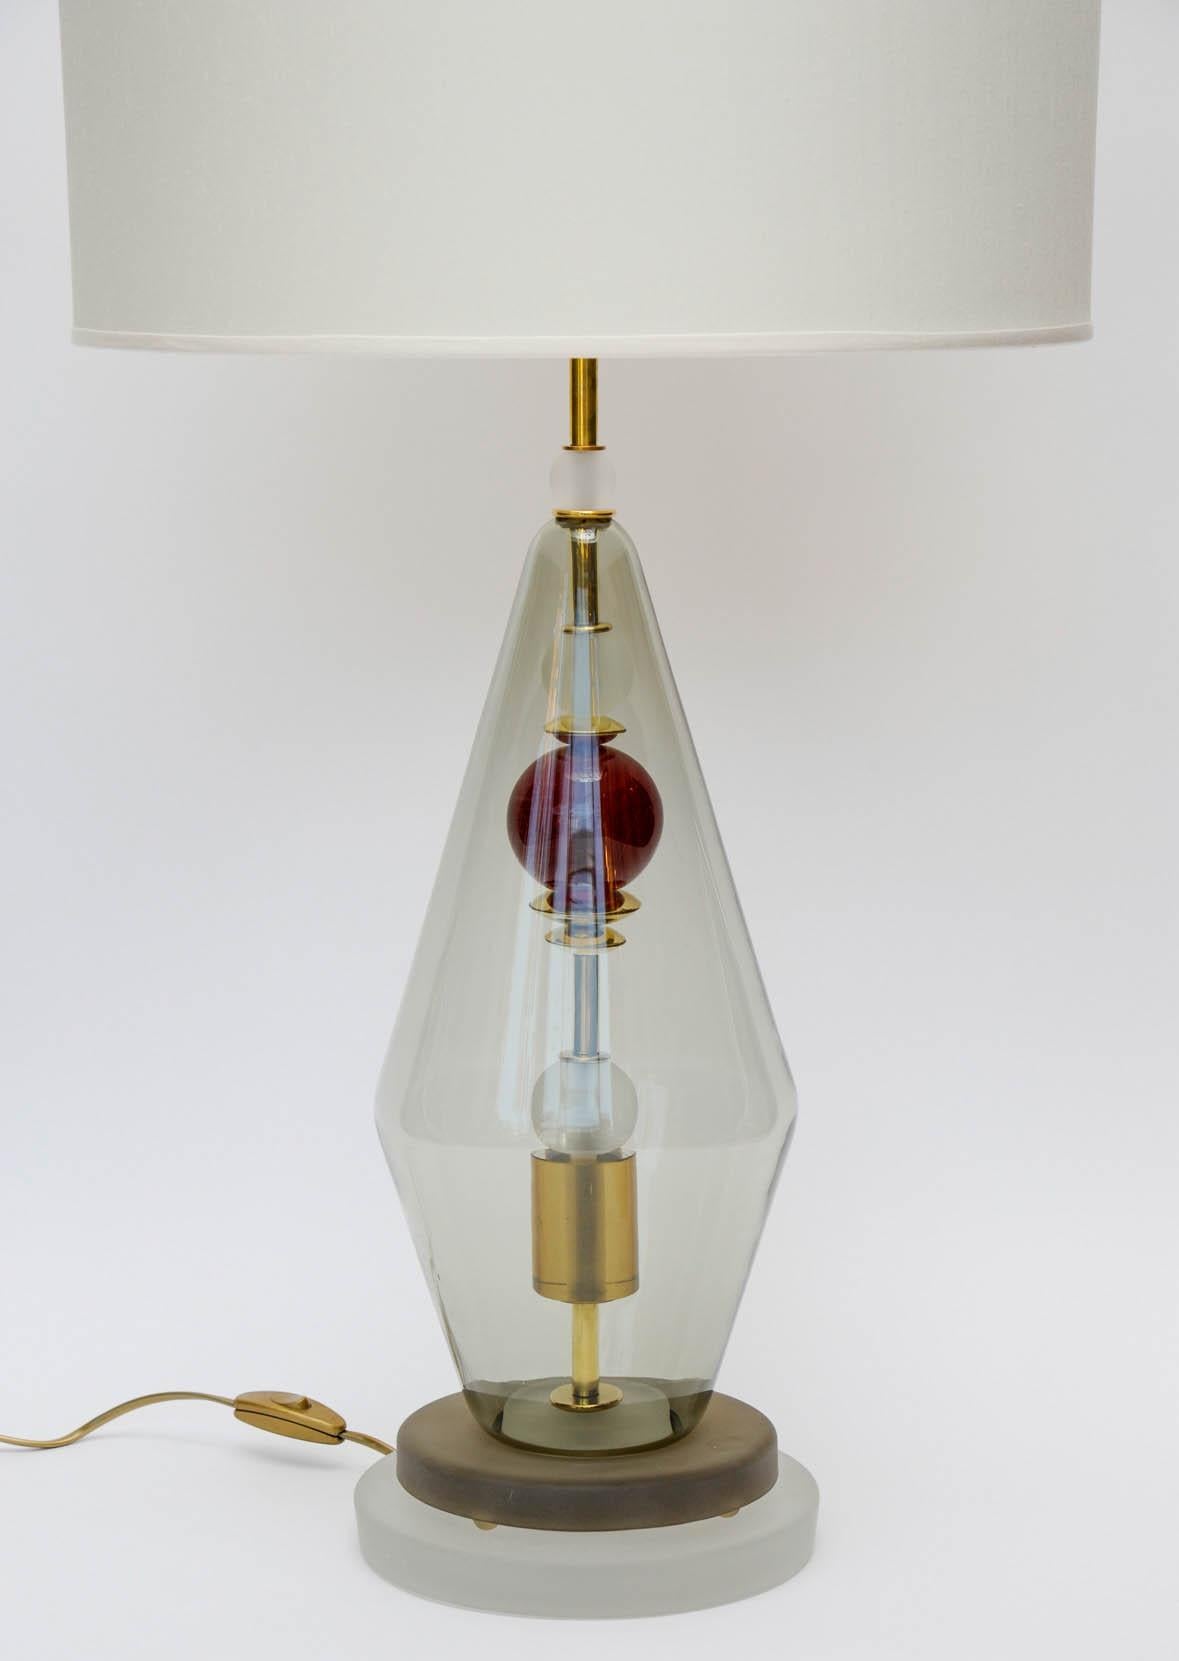 Pair of nice Murano glass table lamps made of a hollow diamond shaped centerpiece in which are threaded multiple Murano coloured parts.

Brass neck, new electrification.